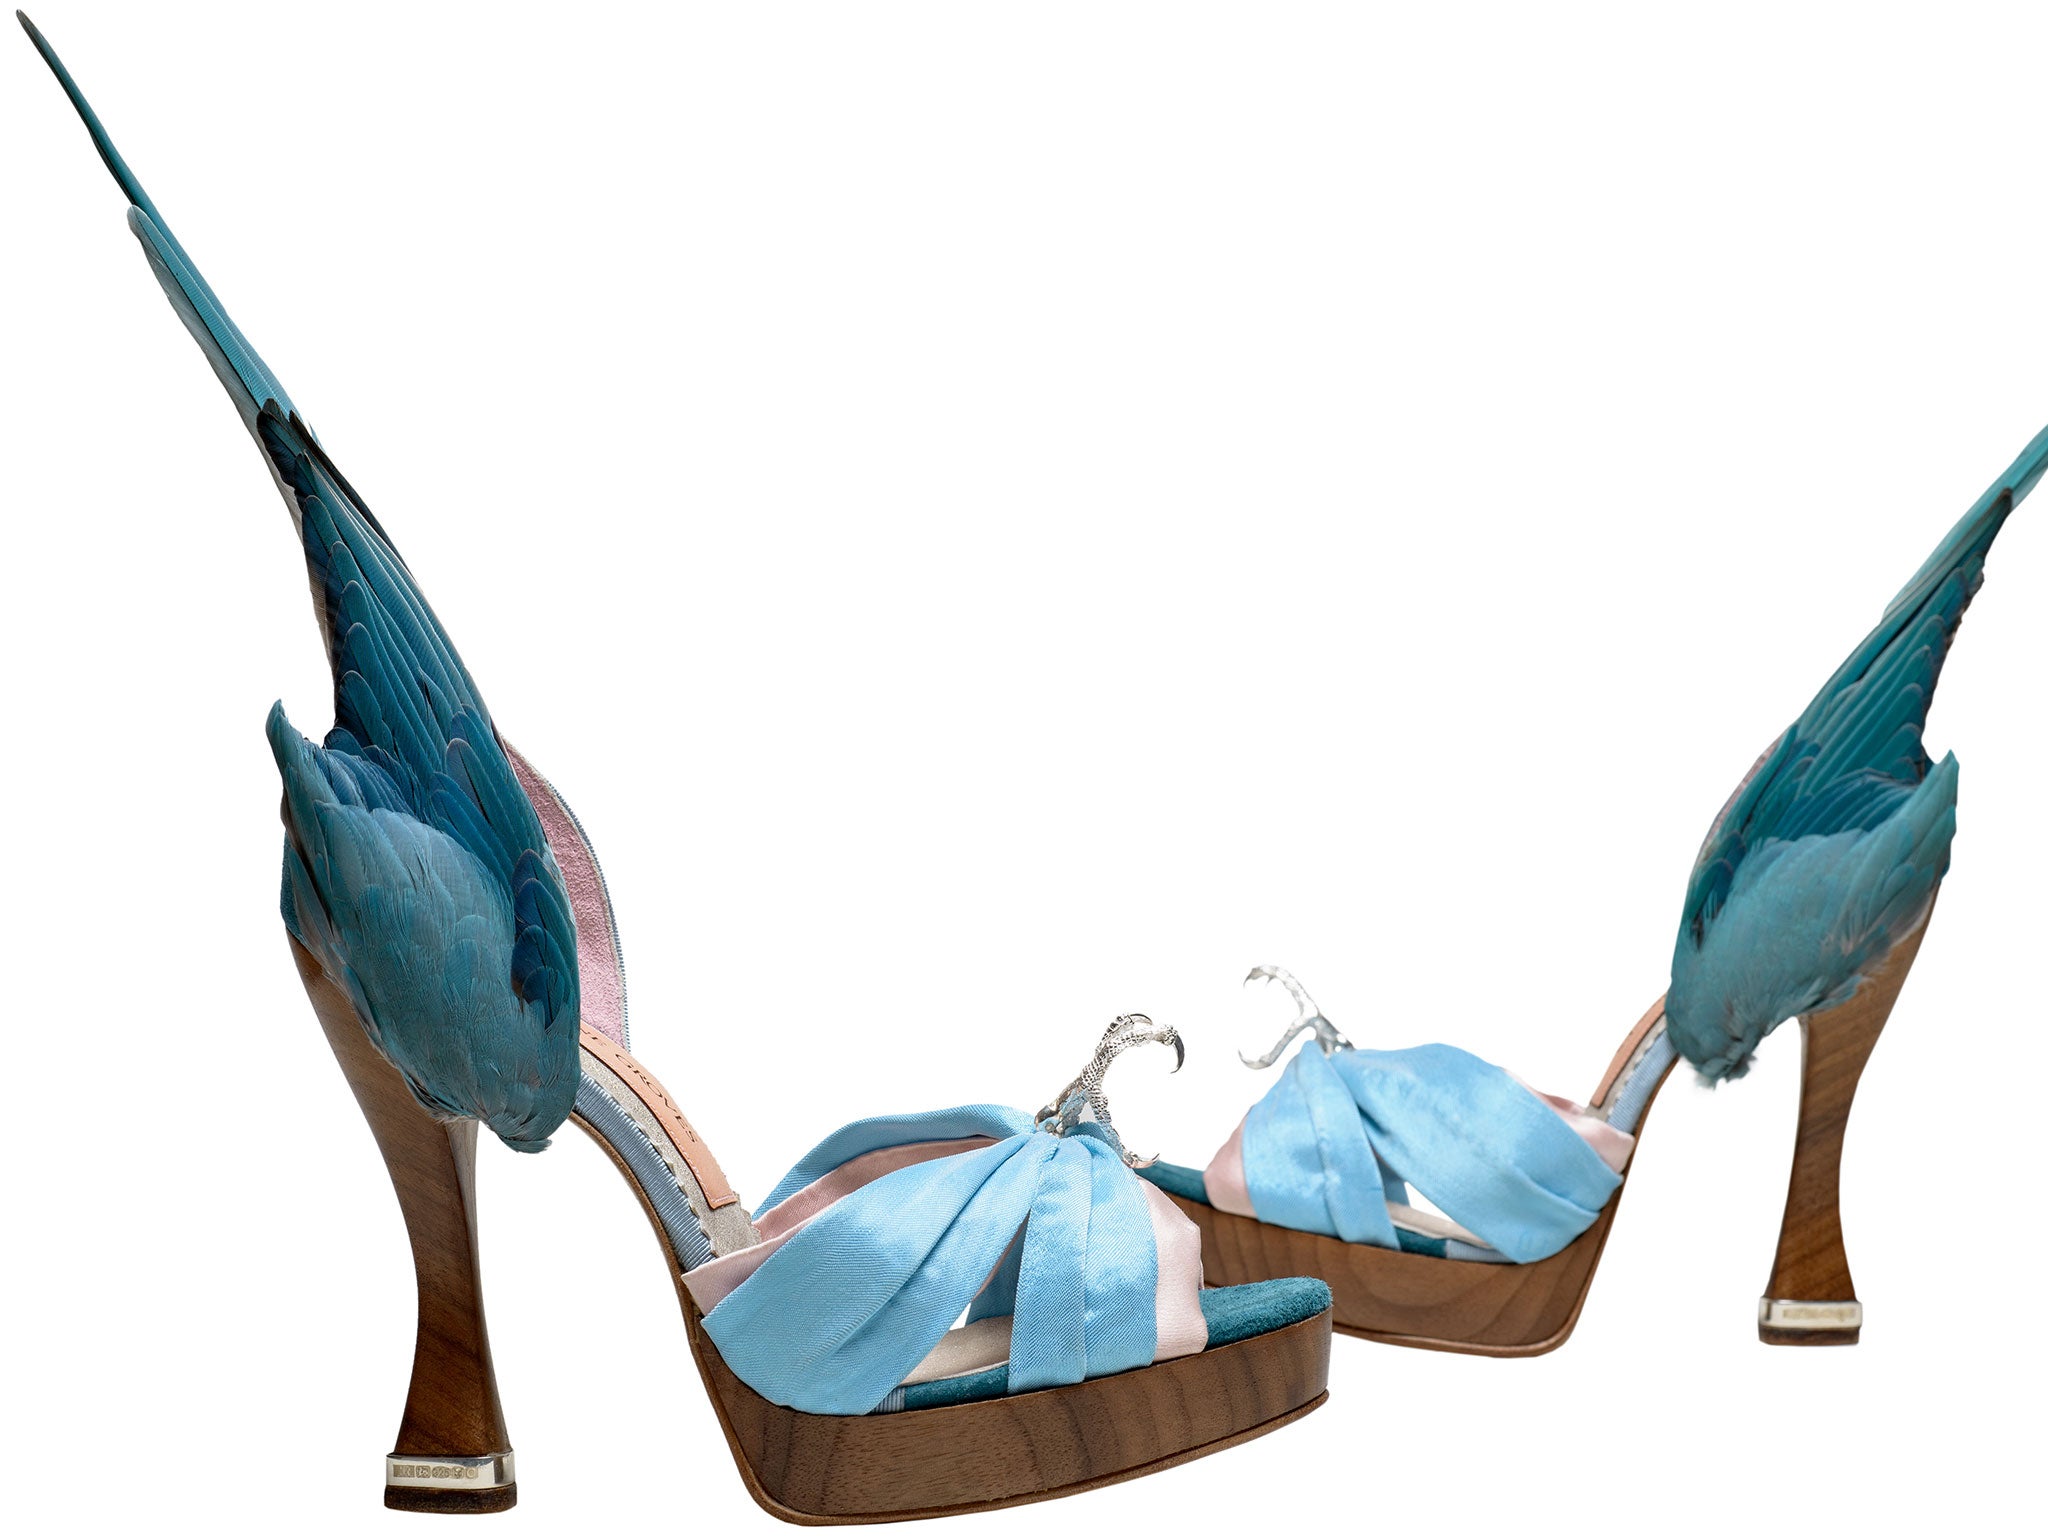 Caroline Groves’ elaborate feather and silk ‘Parakeet’ shoes,
on show at the Victoria and Albert Museum, London